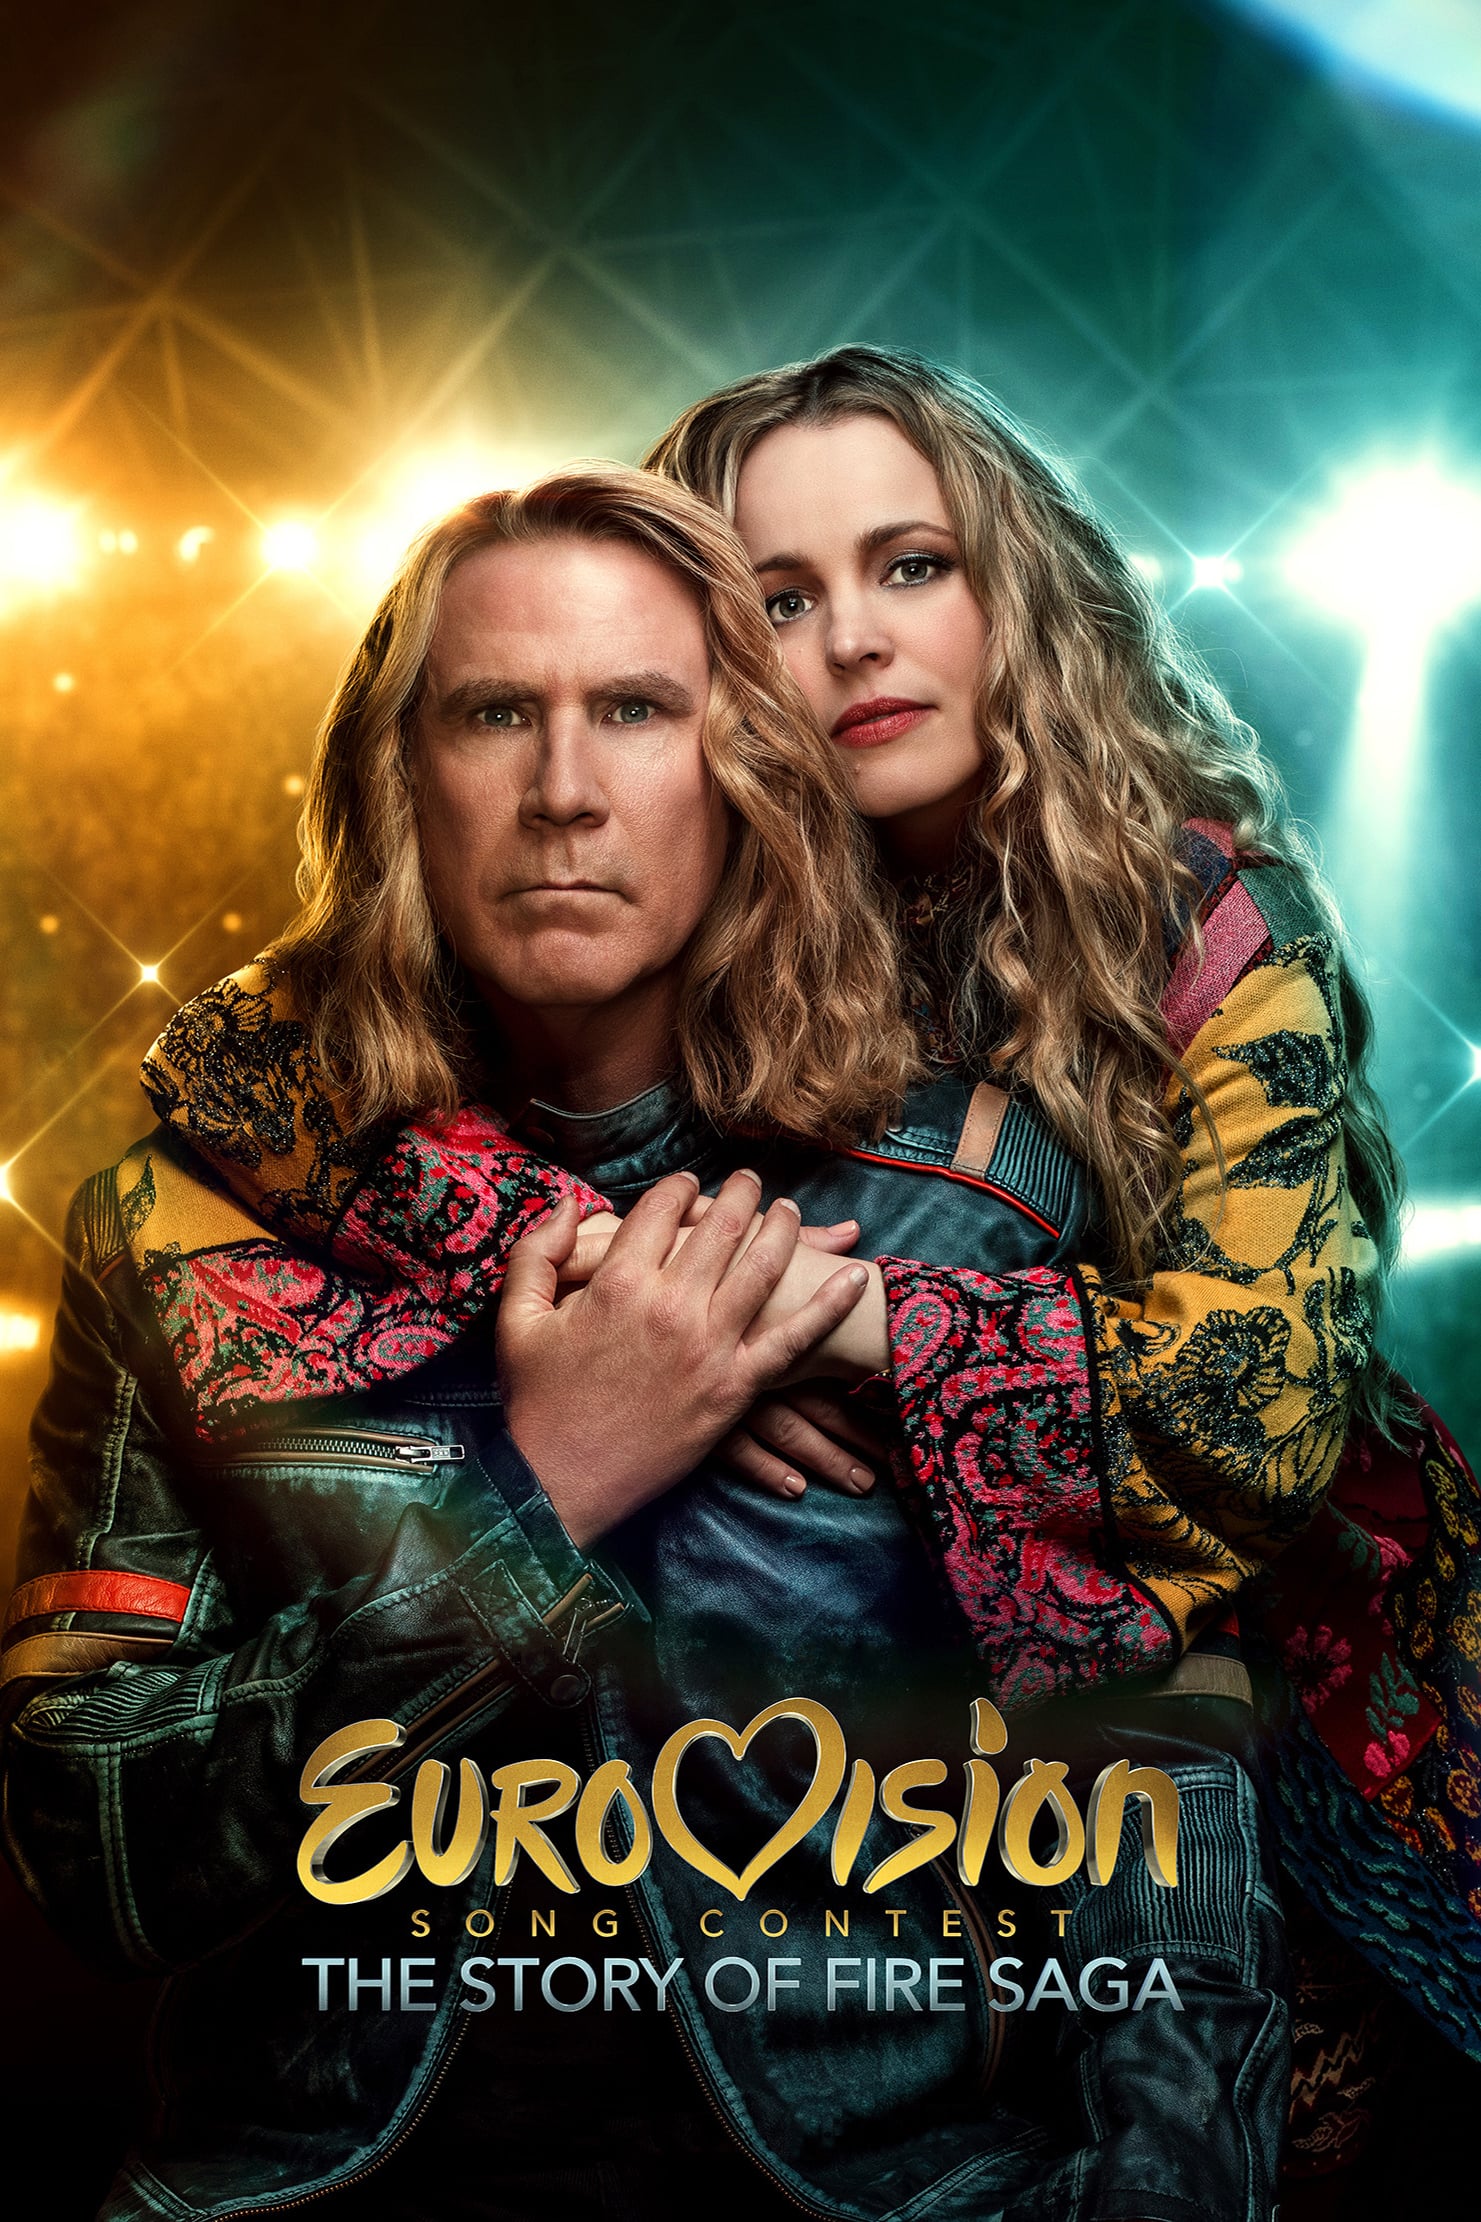 Poster for the movie "Eurovision Song Contest: The Story of Fire Saga"